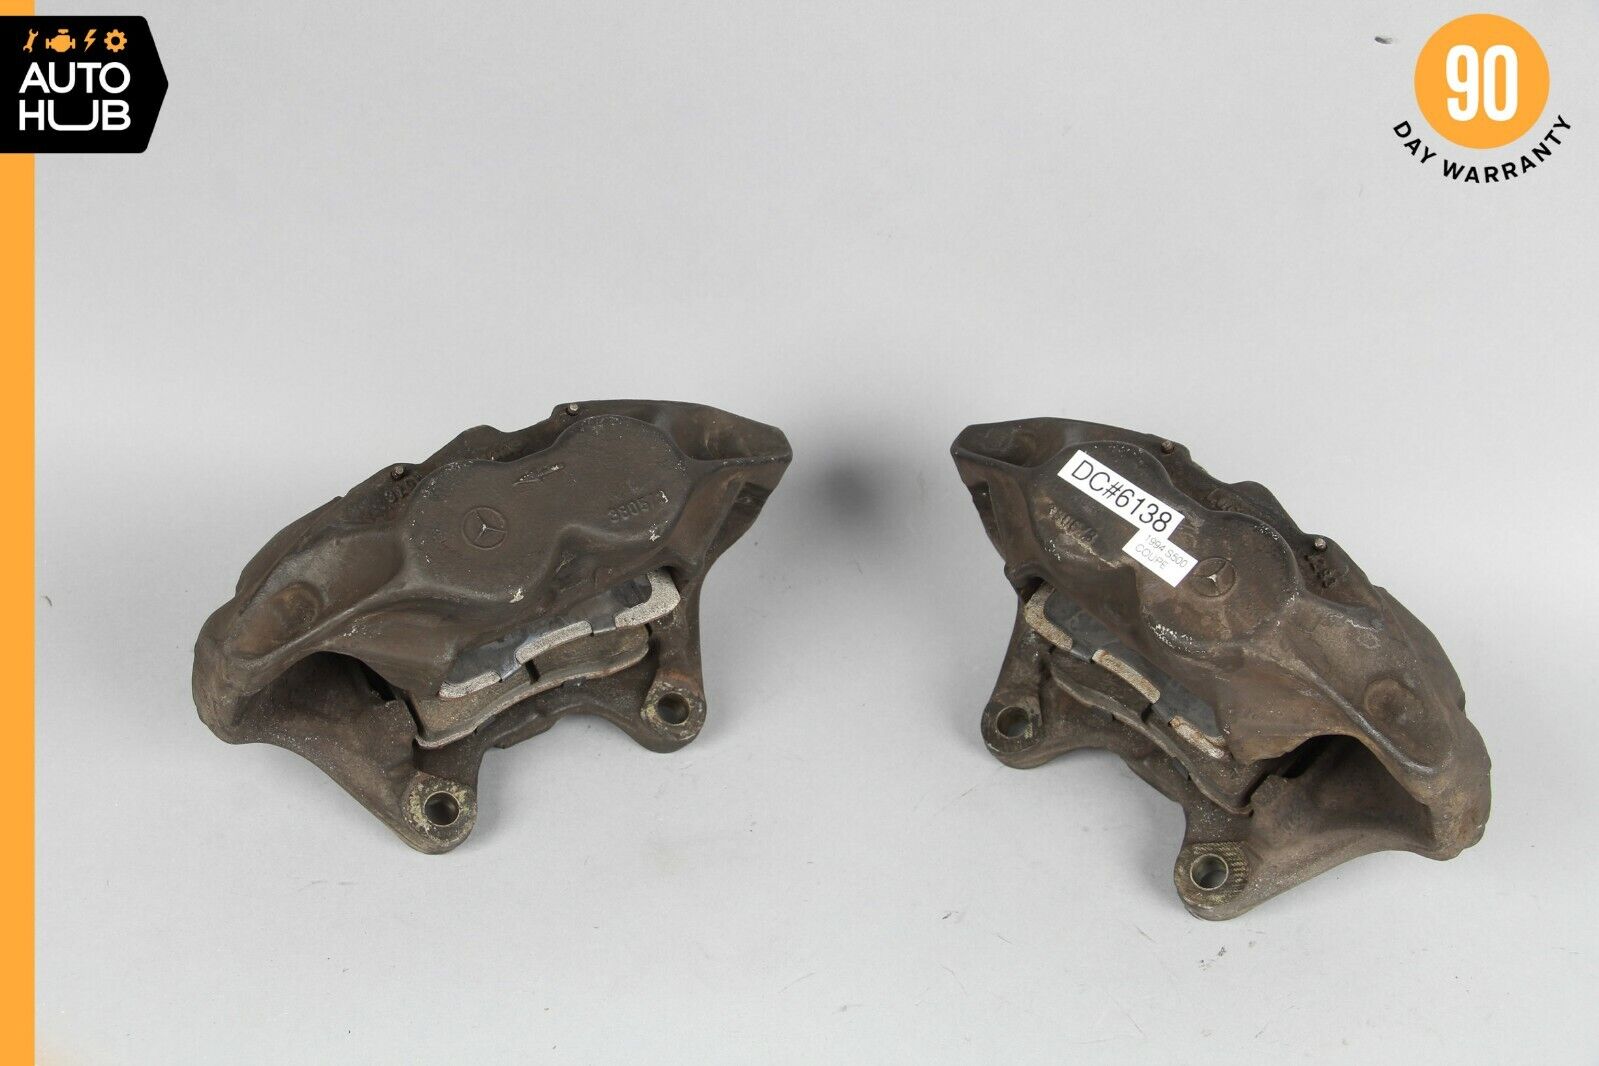 Mercede W140 S500 S420 CL600 S600 Front Brake Calipers Right & Left Set OEM